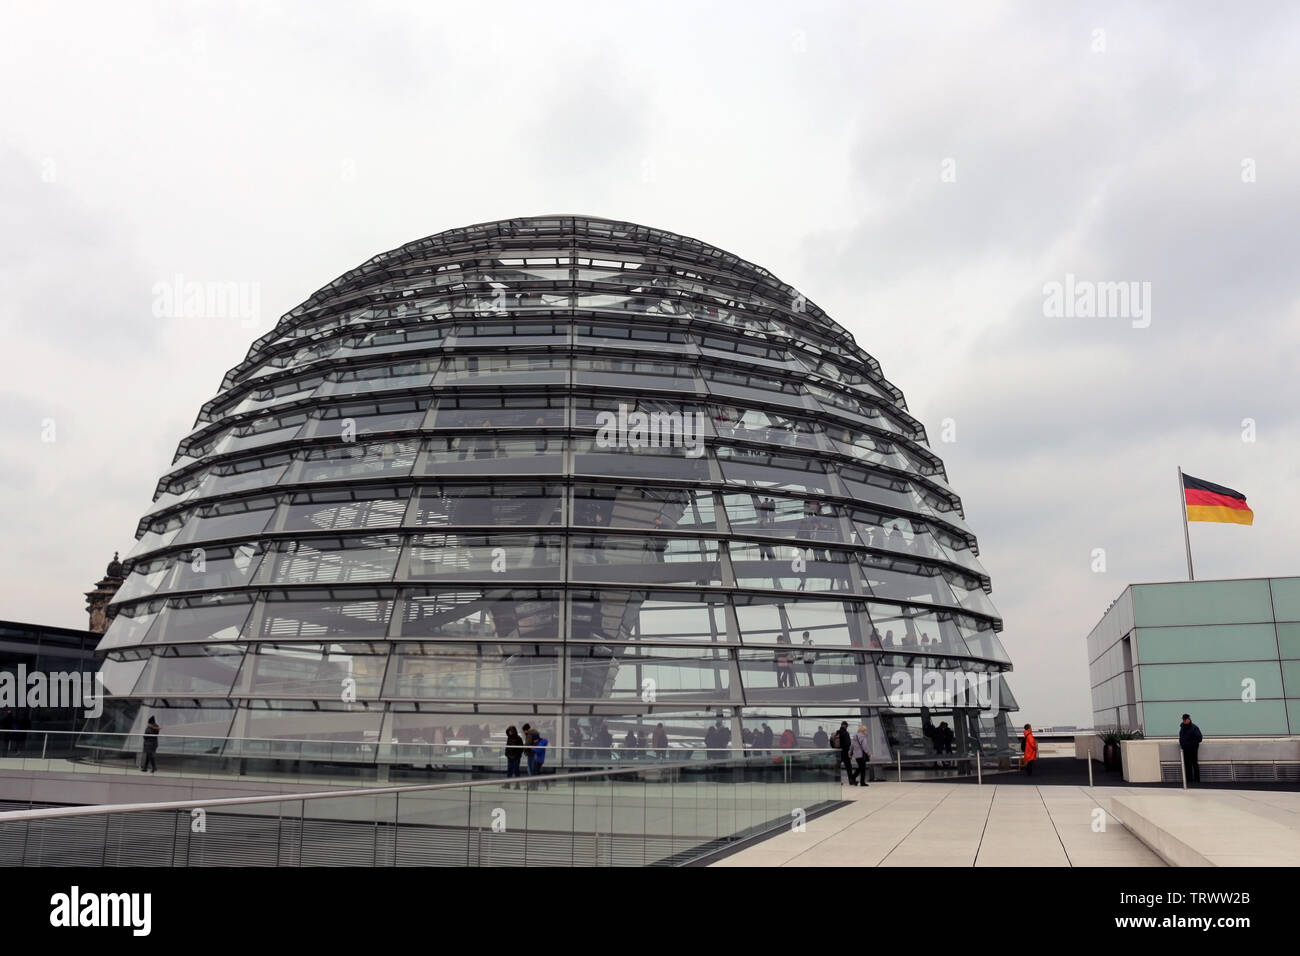 The Reichstag dome is a glass dome, built on top of the renovated Reichstag building in Berlin. Stock Photo